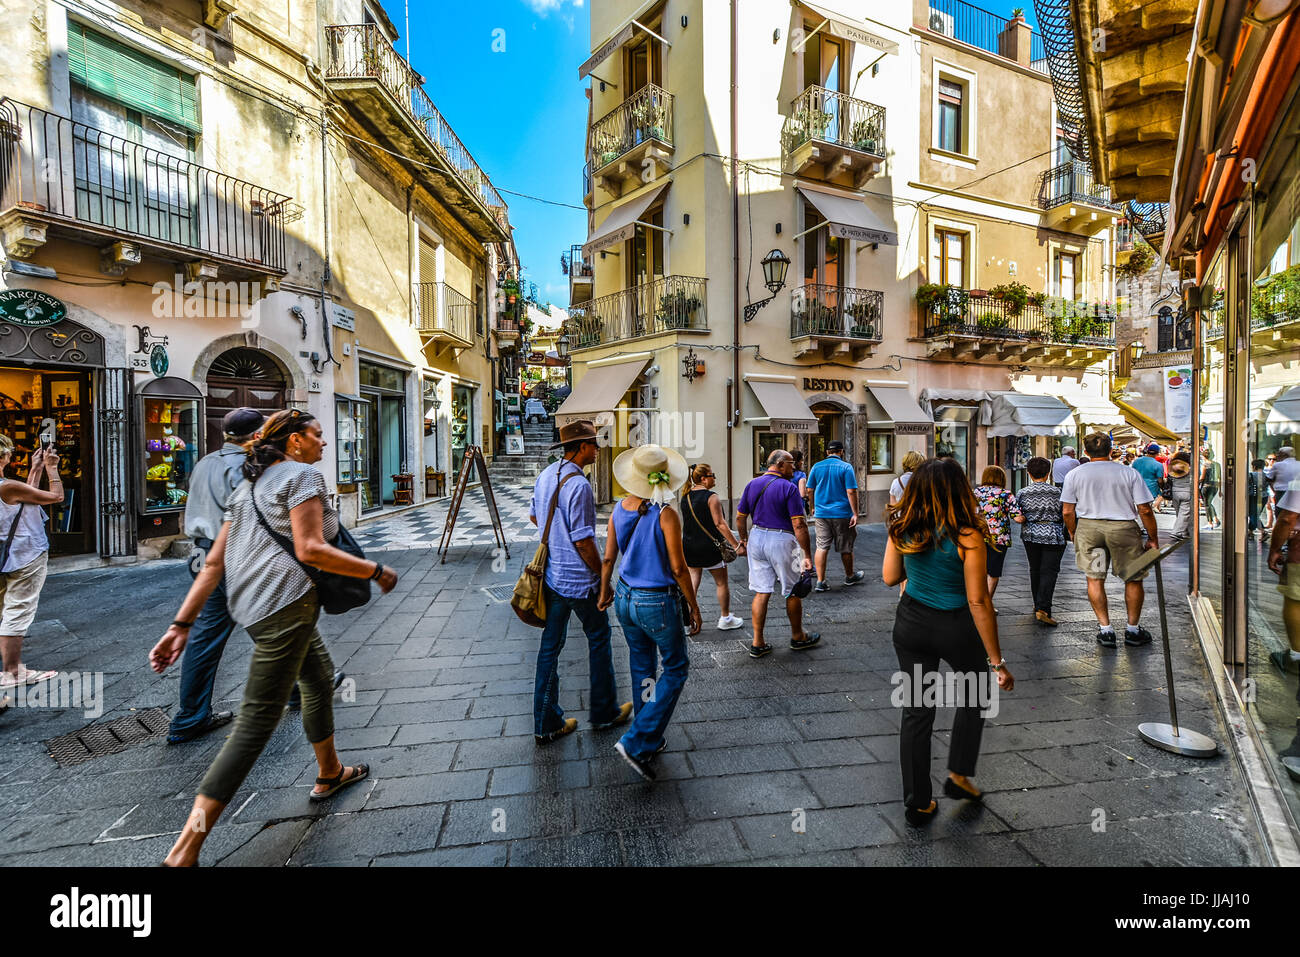 The picturesque old town section of Taormina with tourists window shopping on the Italian island of Sicily Stock Photo